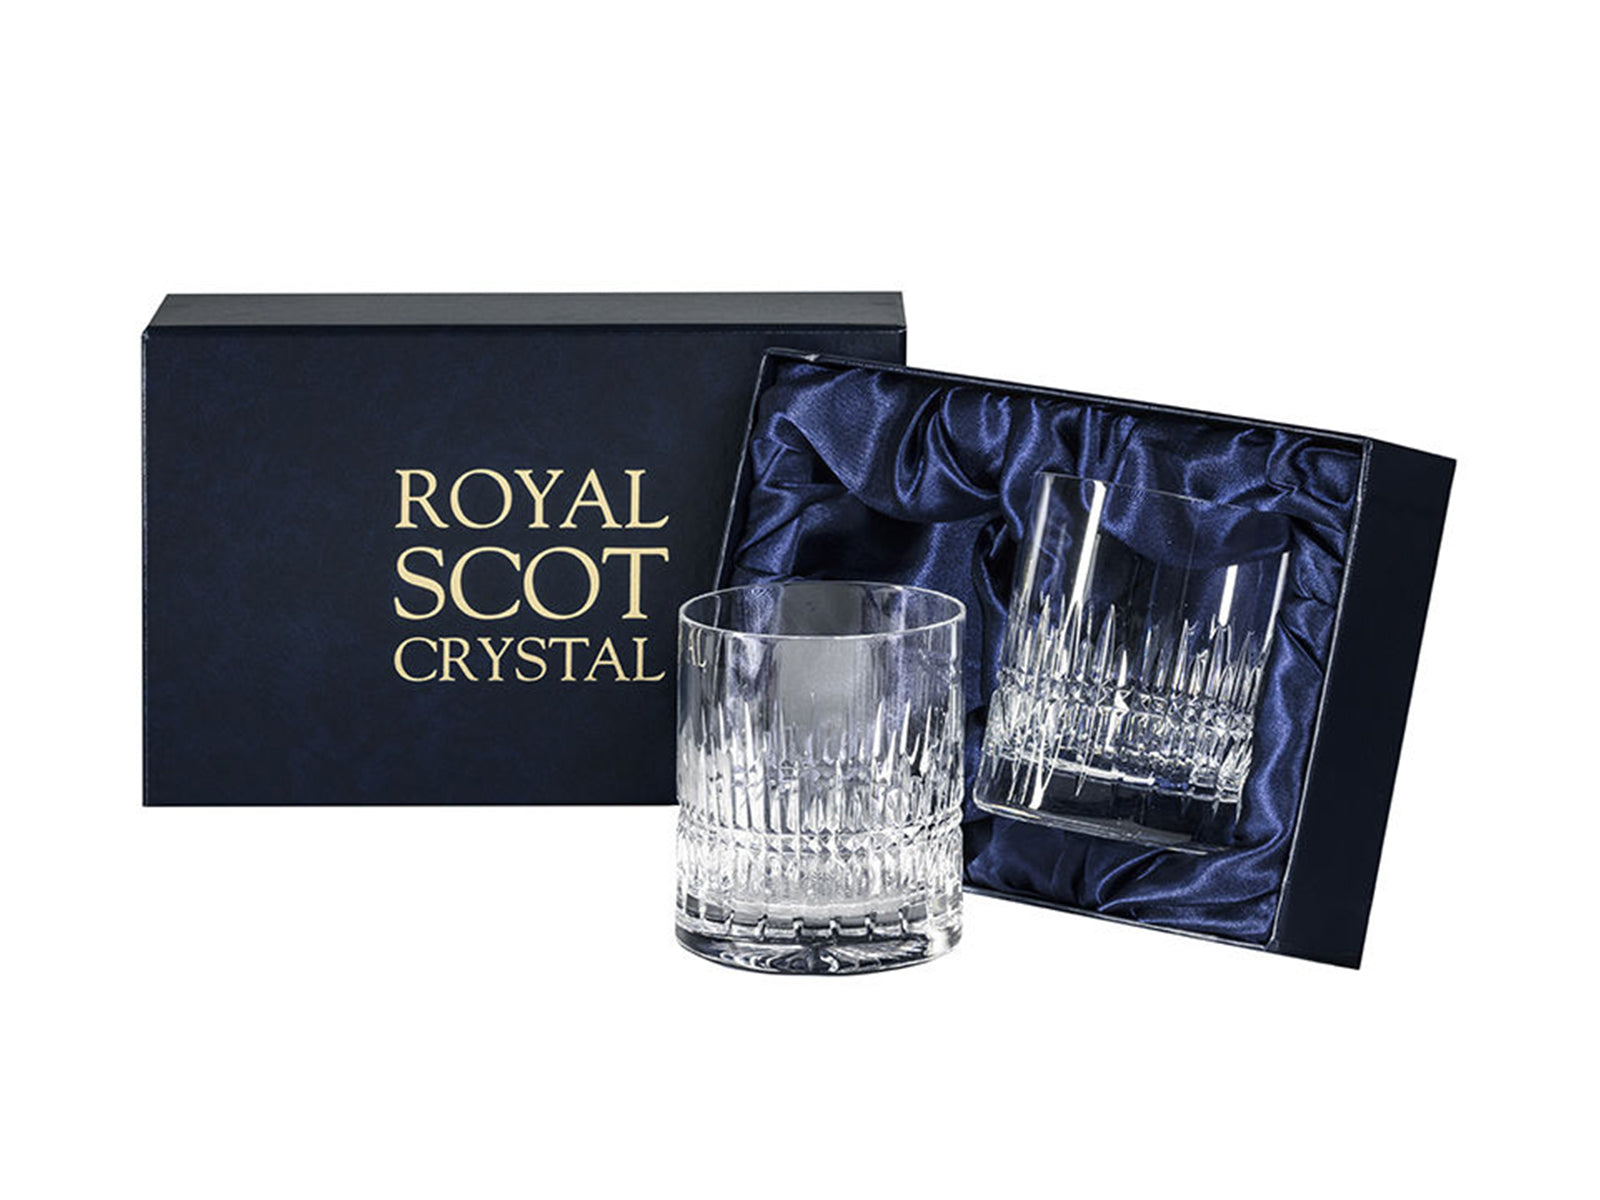 A pair of cut crystal whisky tumblers with vertical dashes around the base in a contemporary design. They come in a navy-blue silk-lined presentation box with gold branding on the lid